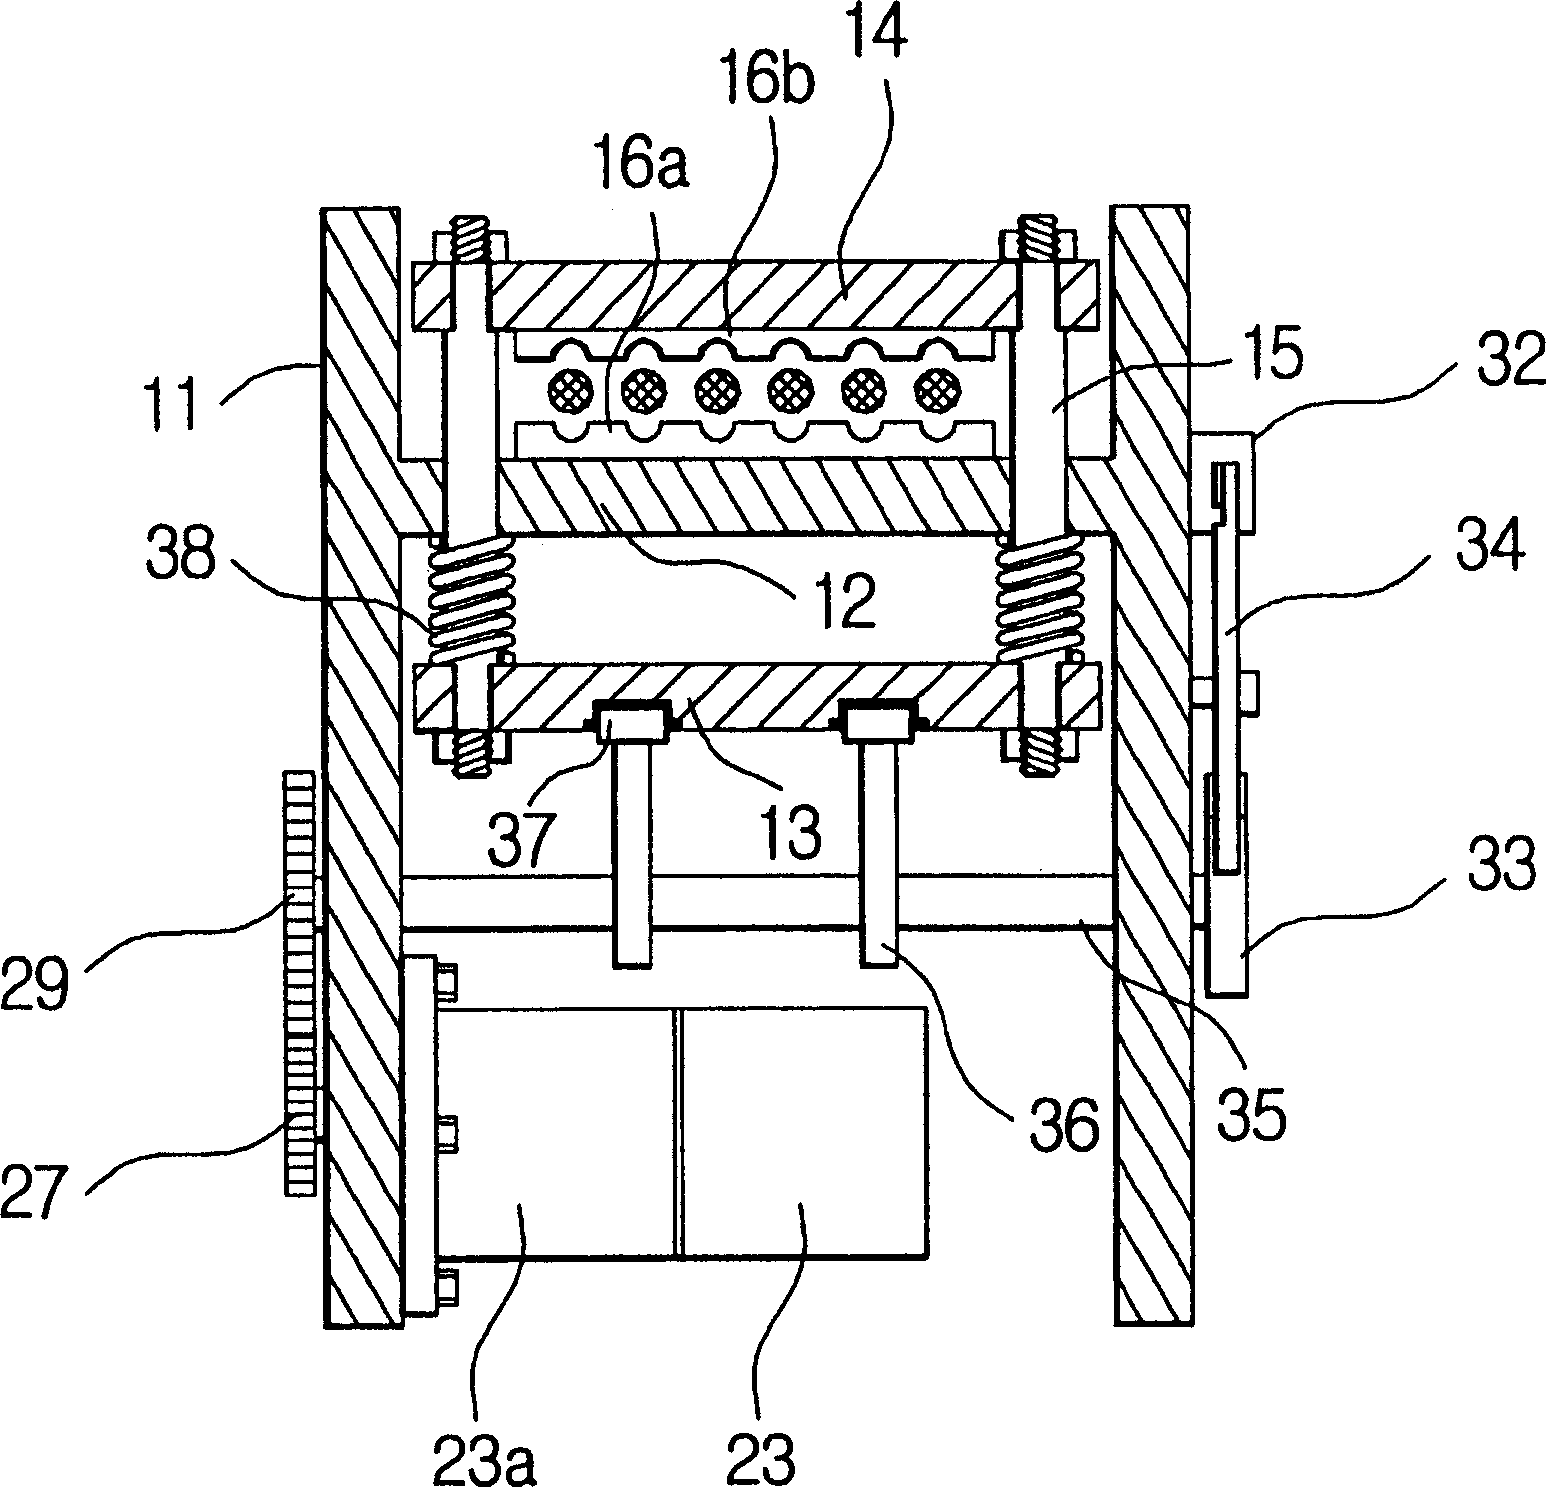 Rope brake system of elevator by using cam